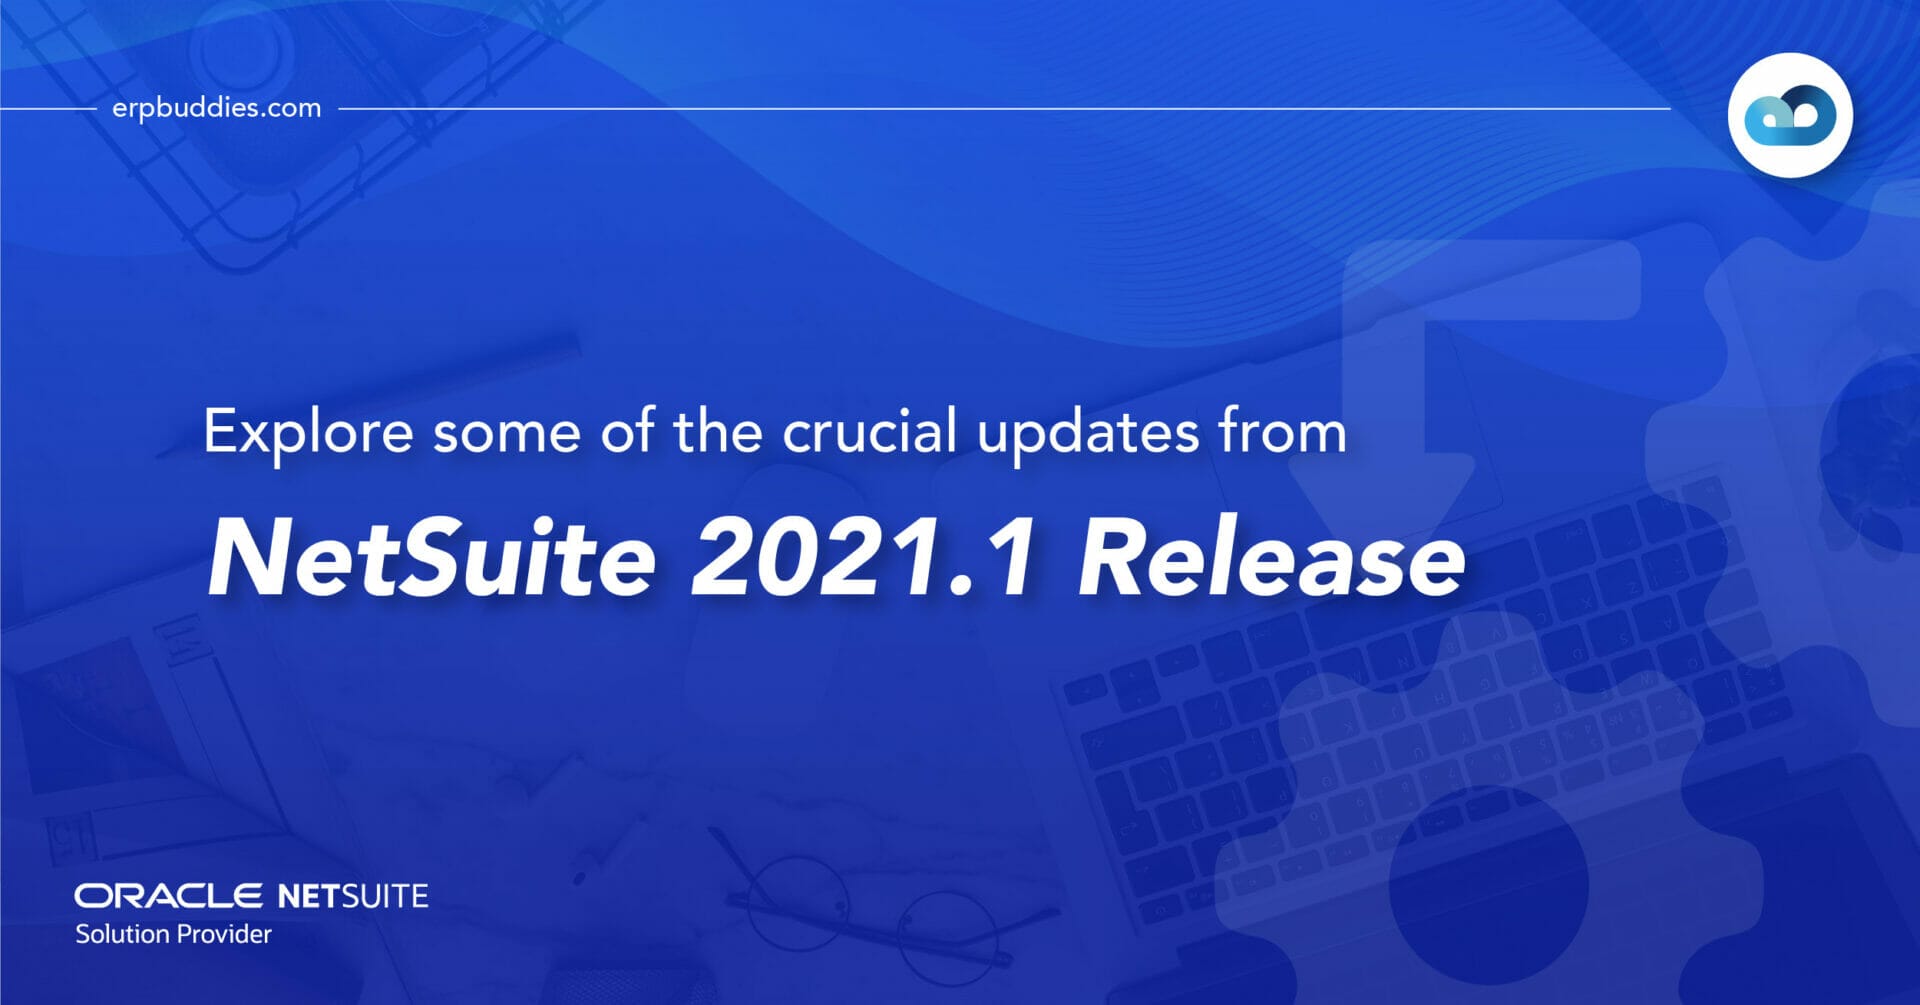 Crucial Updates from NetSuite 2021.1 Release